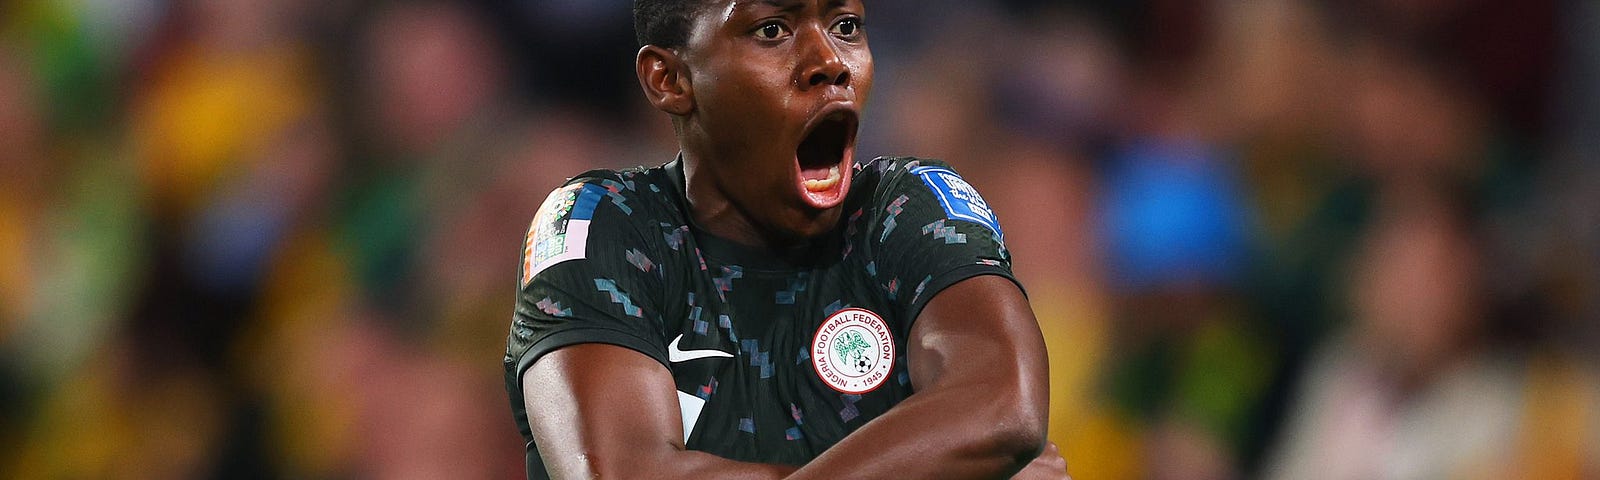 Oshoala’s shirt removal celebration after she netted the winning goal for Nigeria against FIFA Women’s World Cup Co-host, Australia. This move has become criticized by religious people and sports pundits due to the yellow card she accrued for the move. This is the first time Nigeria’s Super Falcons have come from behind to win in a World Cup tournament.